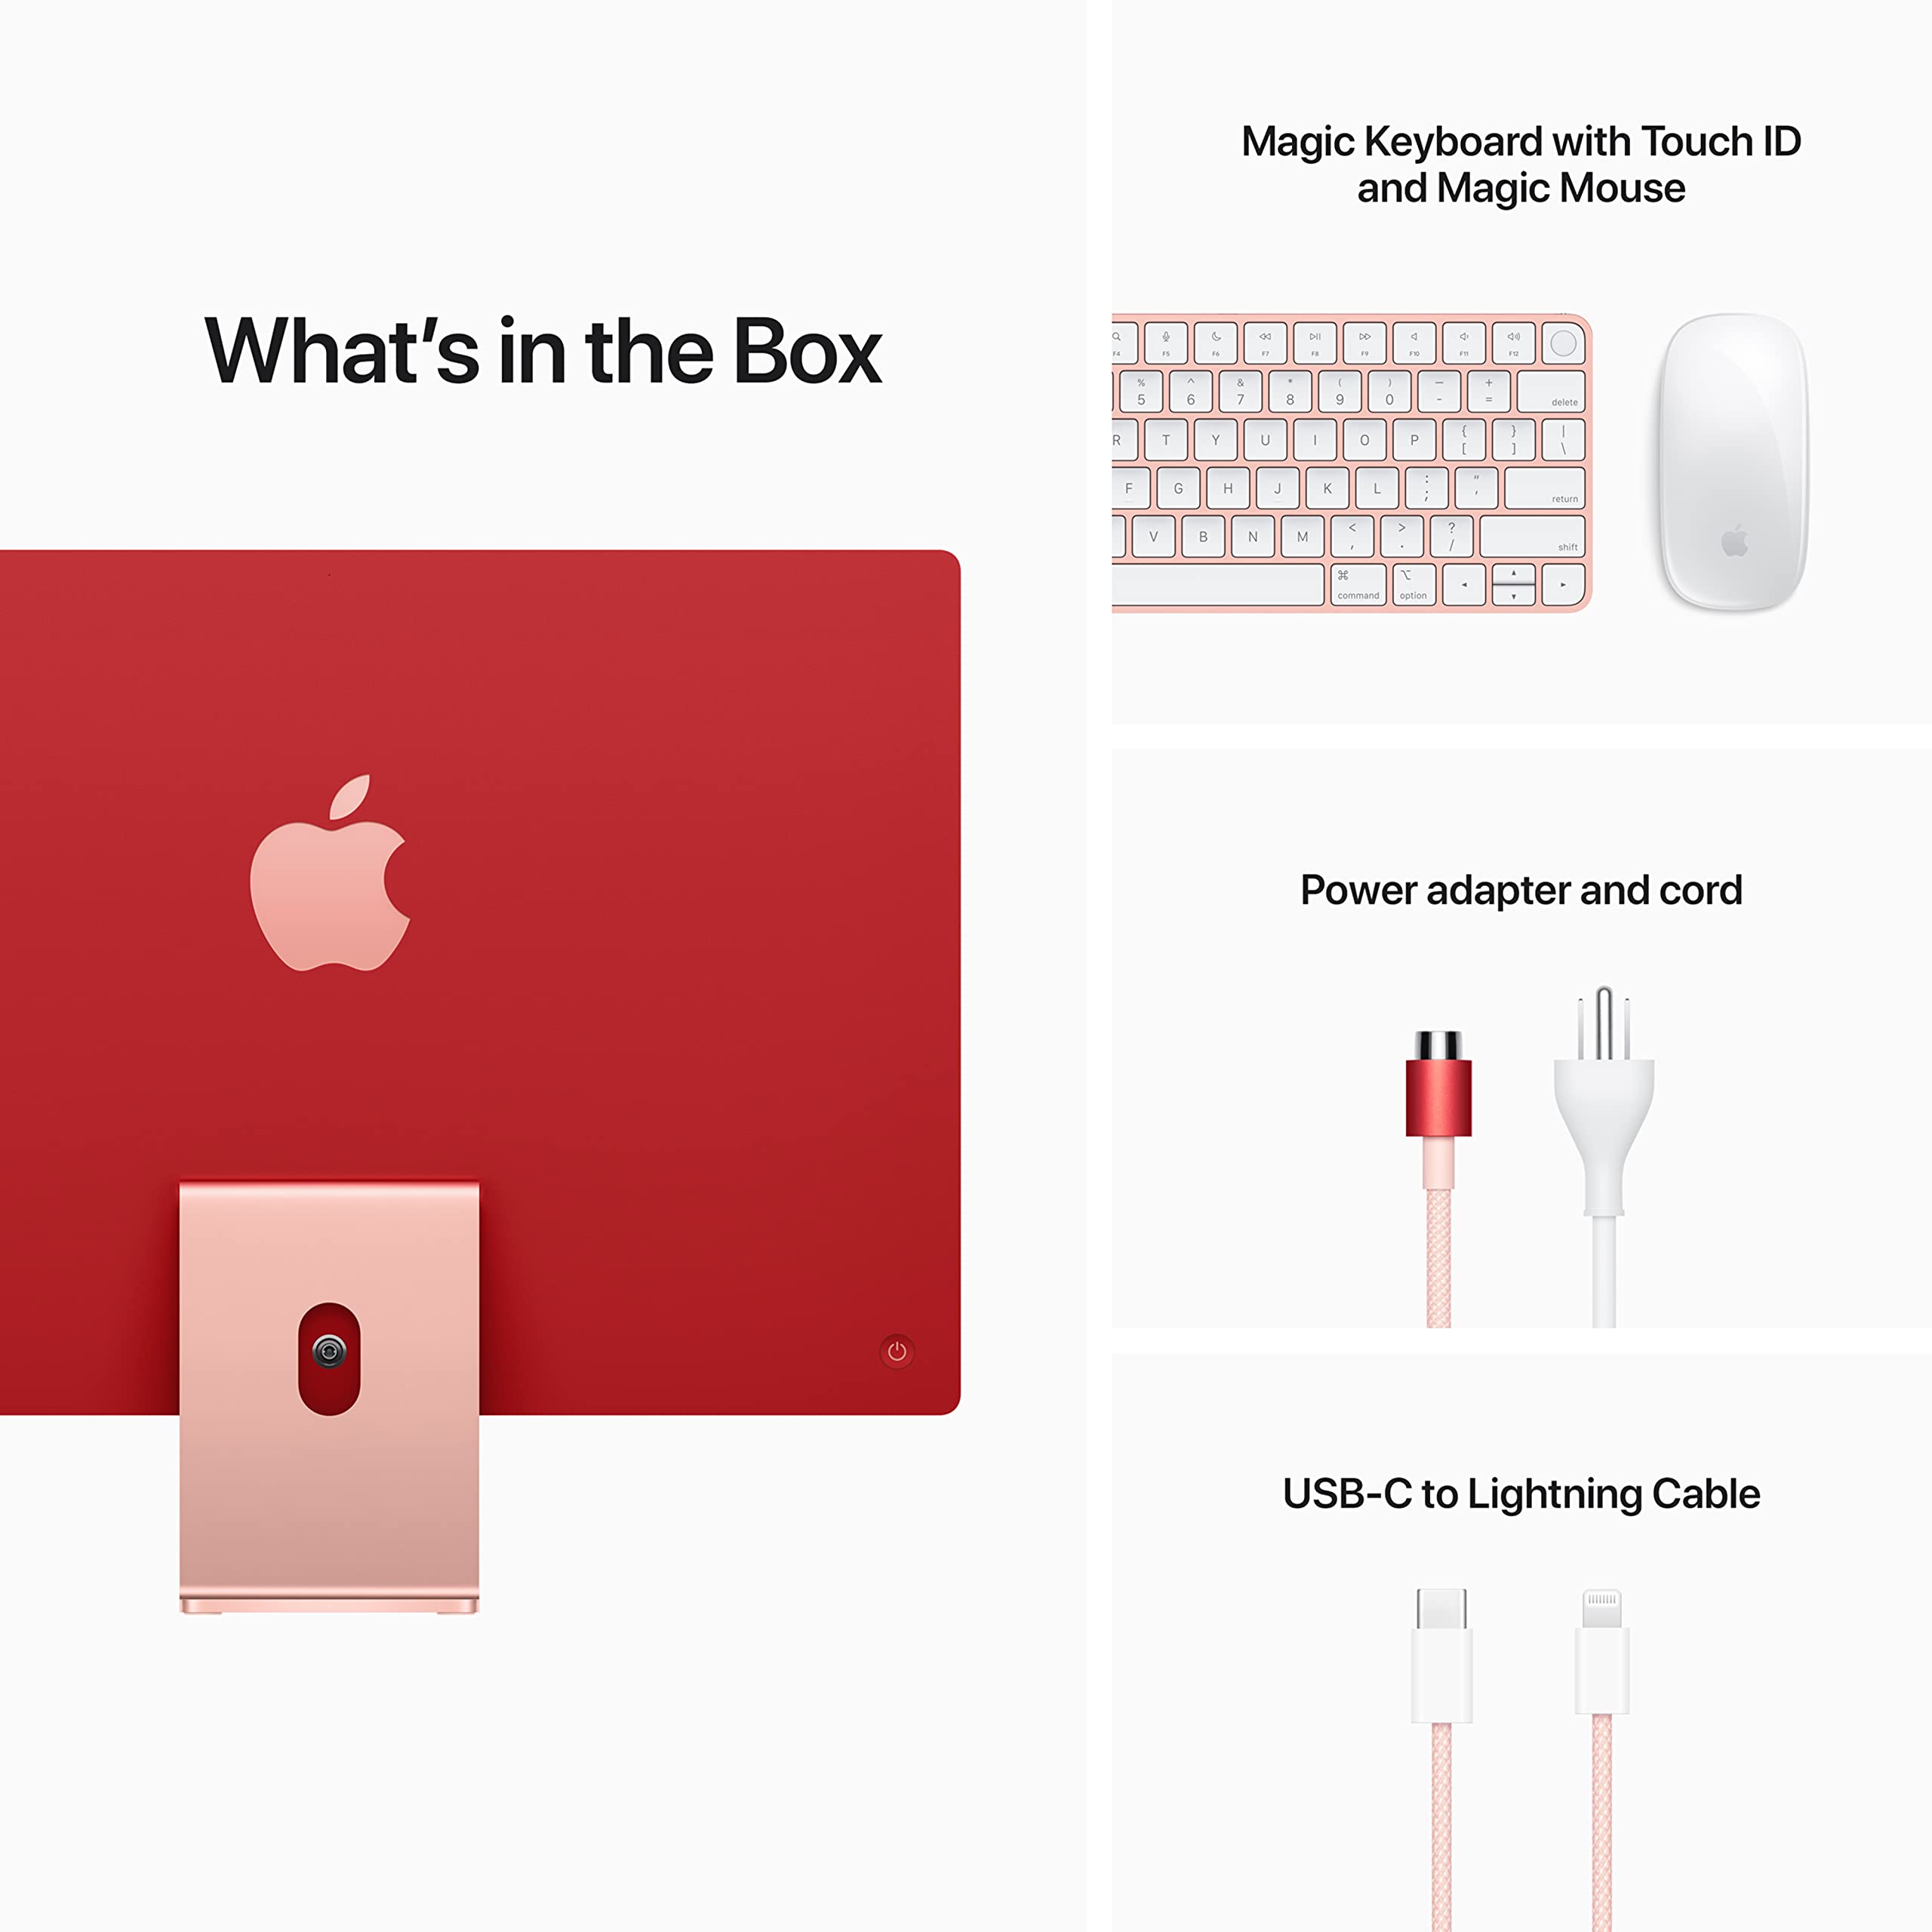 Apple 2021 iMac All in one Desktop Computer with M1 chip: 8-core CPU, 8-core GPU, 24-inch Retina Display, 8GB RAM, 256GB SSD Storage, Matching Accessories. Works with iPhone/iPad; Pink